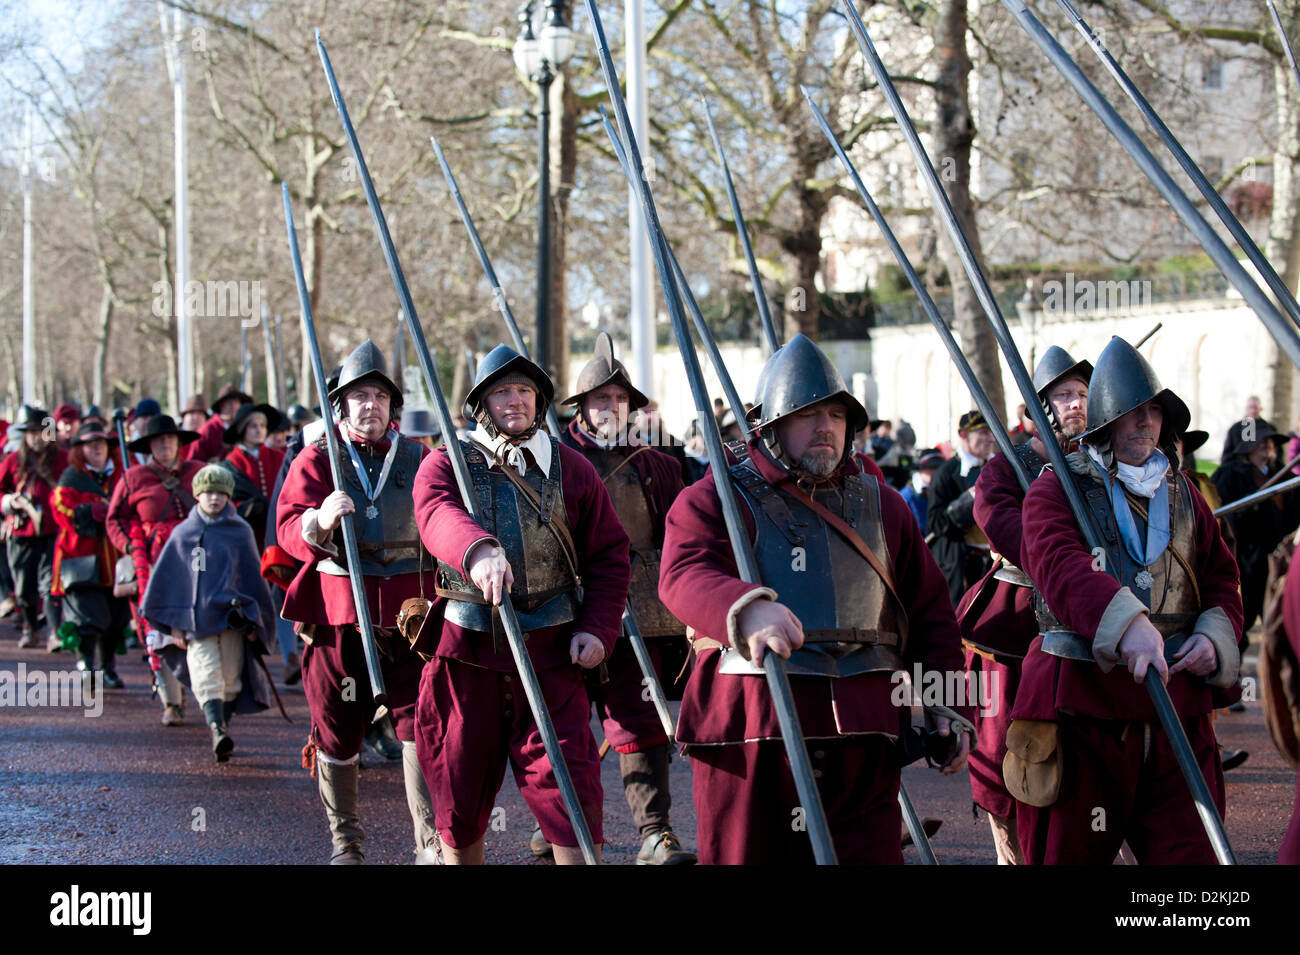 London, UK. 27th Jan, 2013. Members of the English Civil War Society gather in London  The English Civil War reenactors march to attend a service to commemorate the execution of King Charles I. Photographer: Gordon Scammell Stock Photo